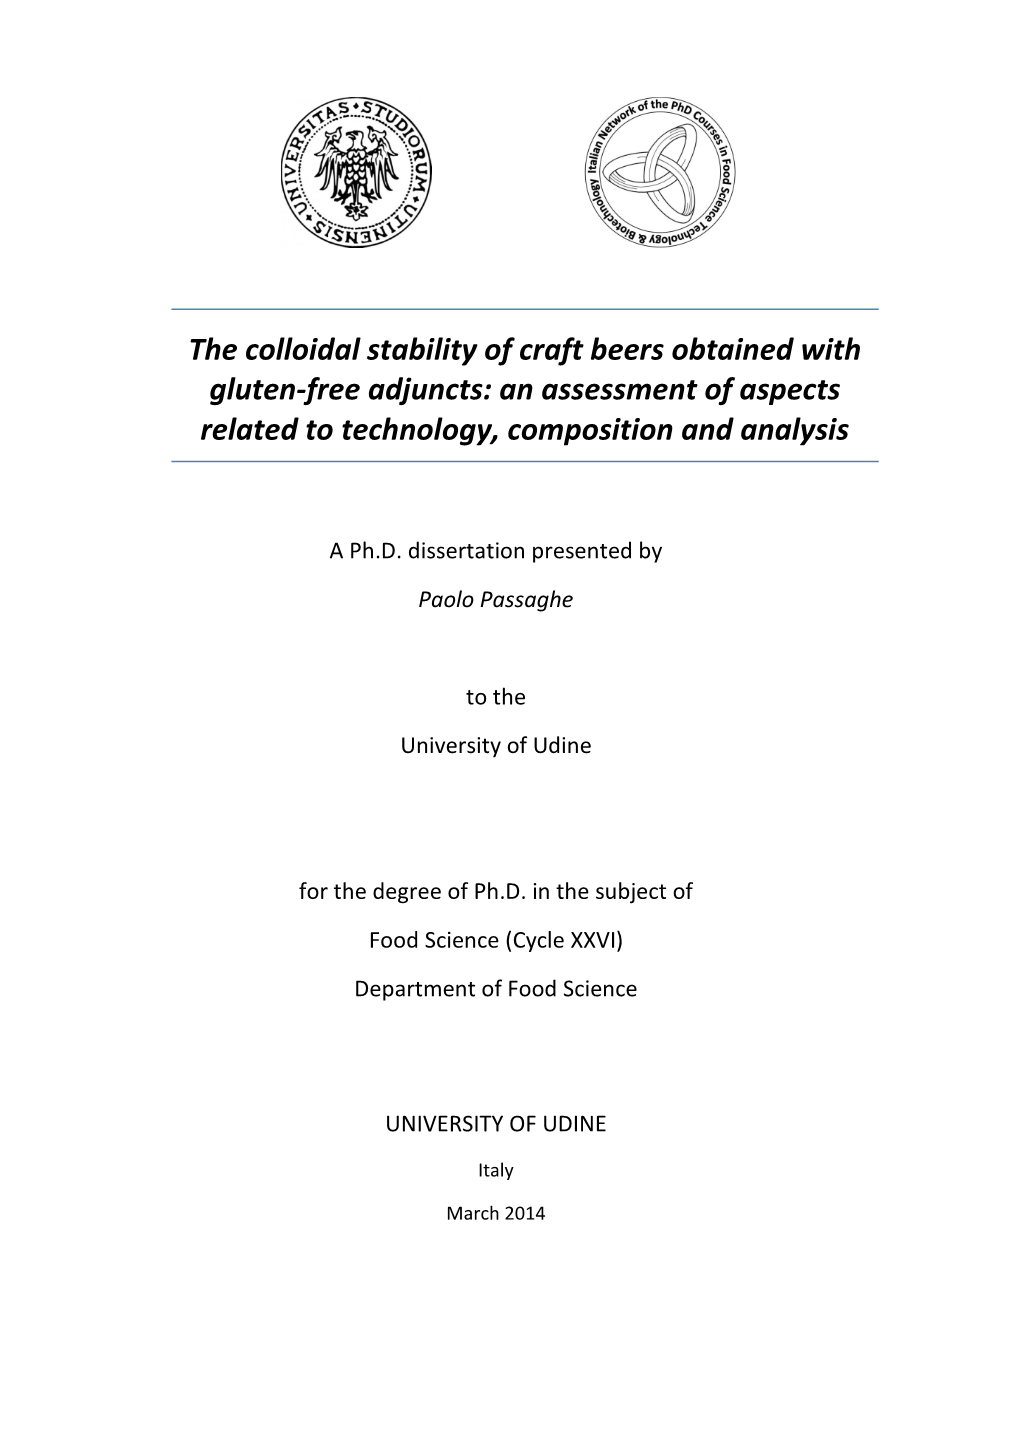 The Colloidal Stability of Craft Beers Obtained with Gluten-Free Adjuncts: an Assessment of Aspects Related to Technology, Composition and Analysis